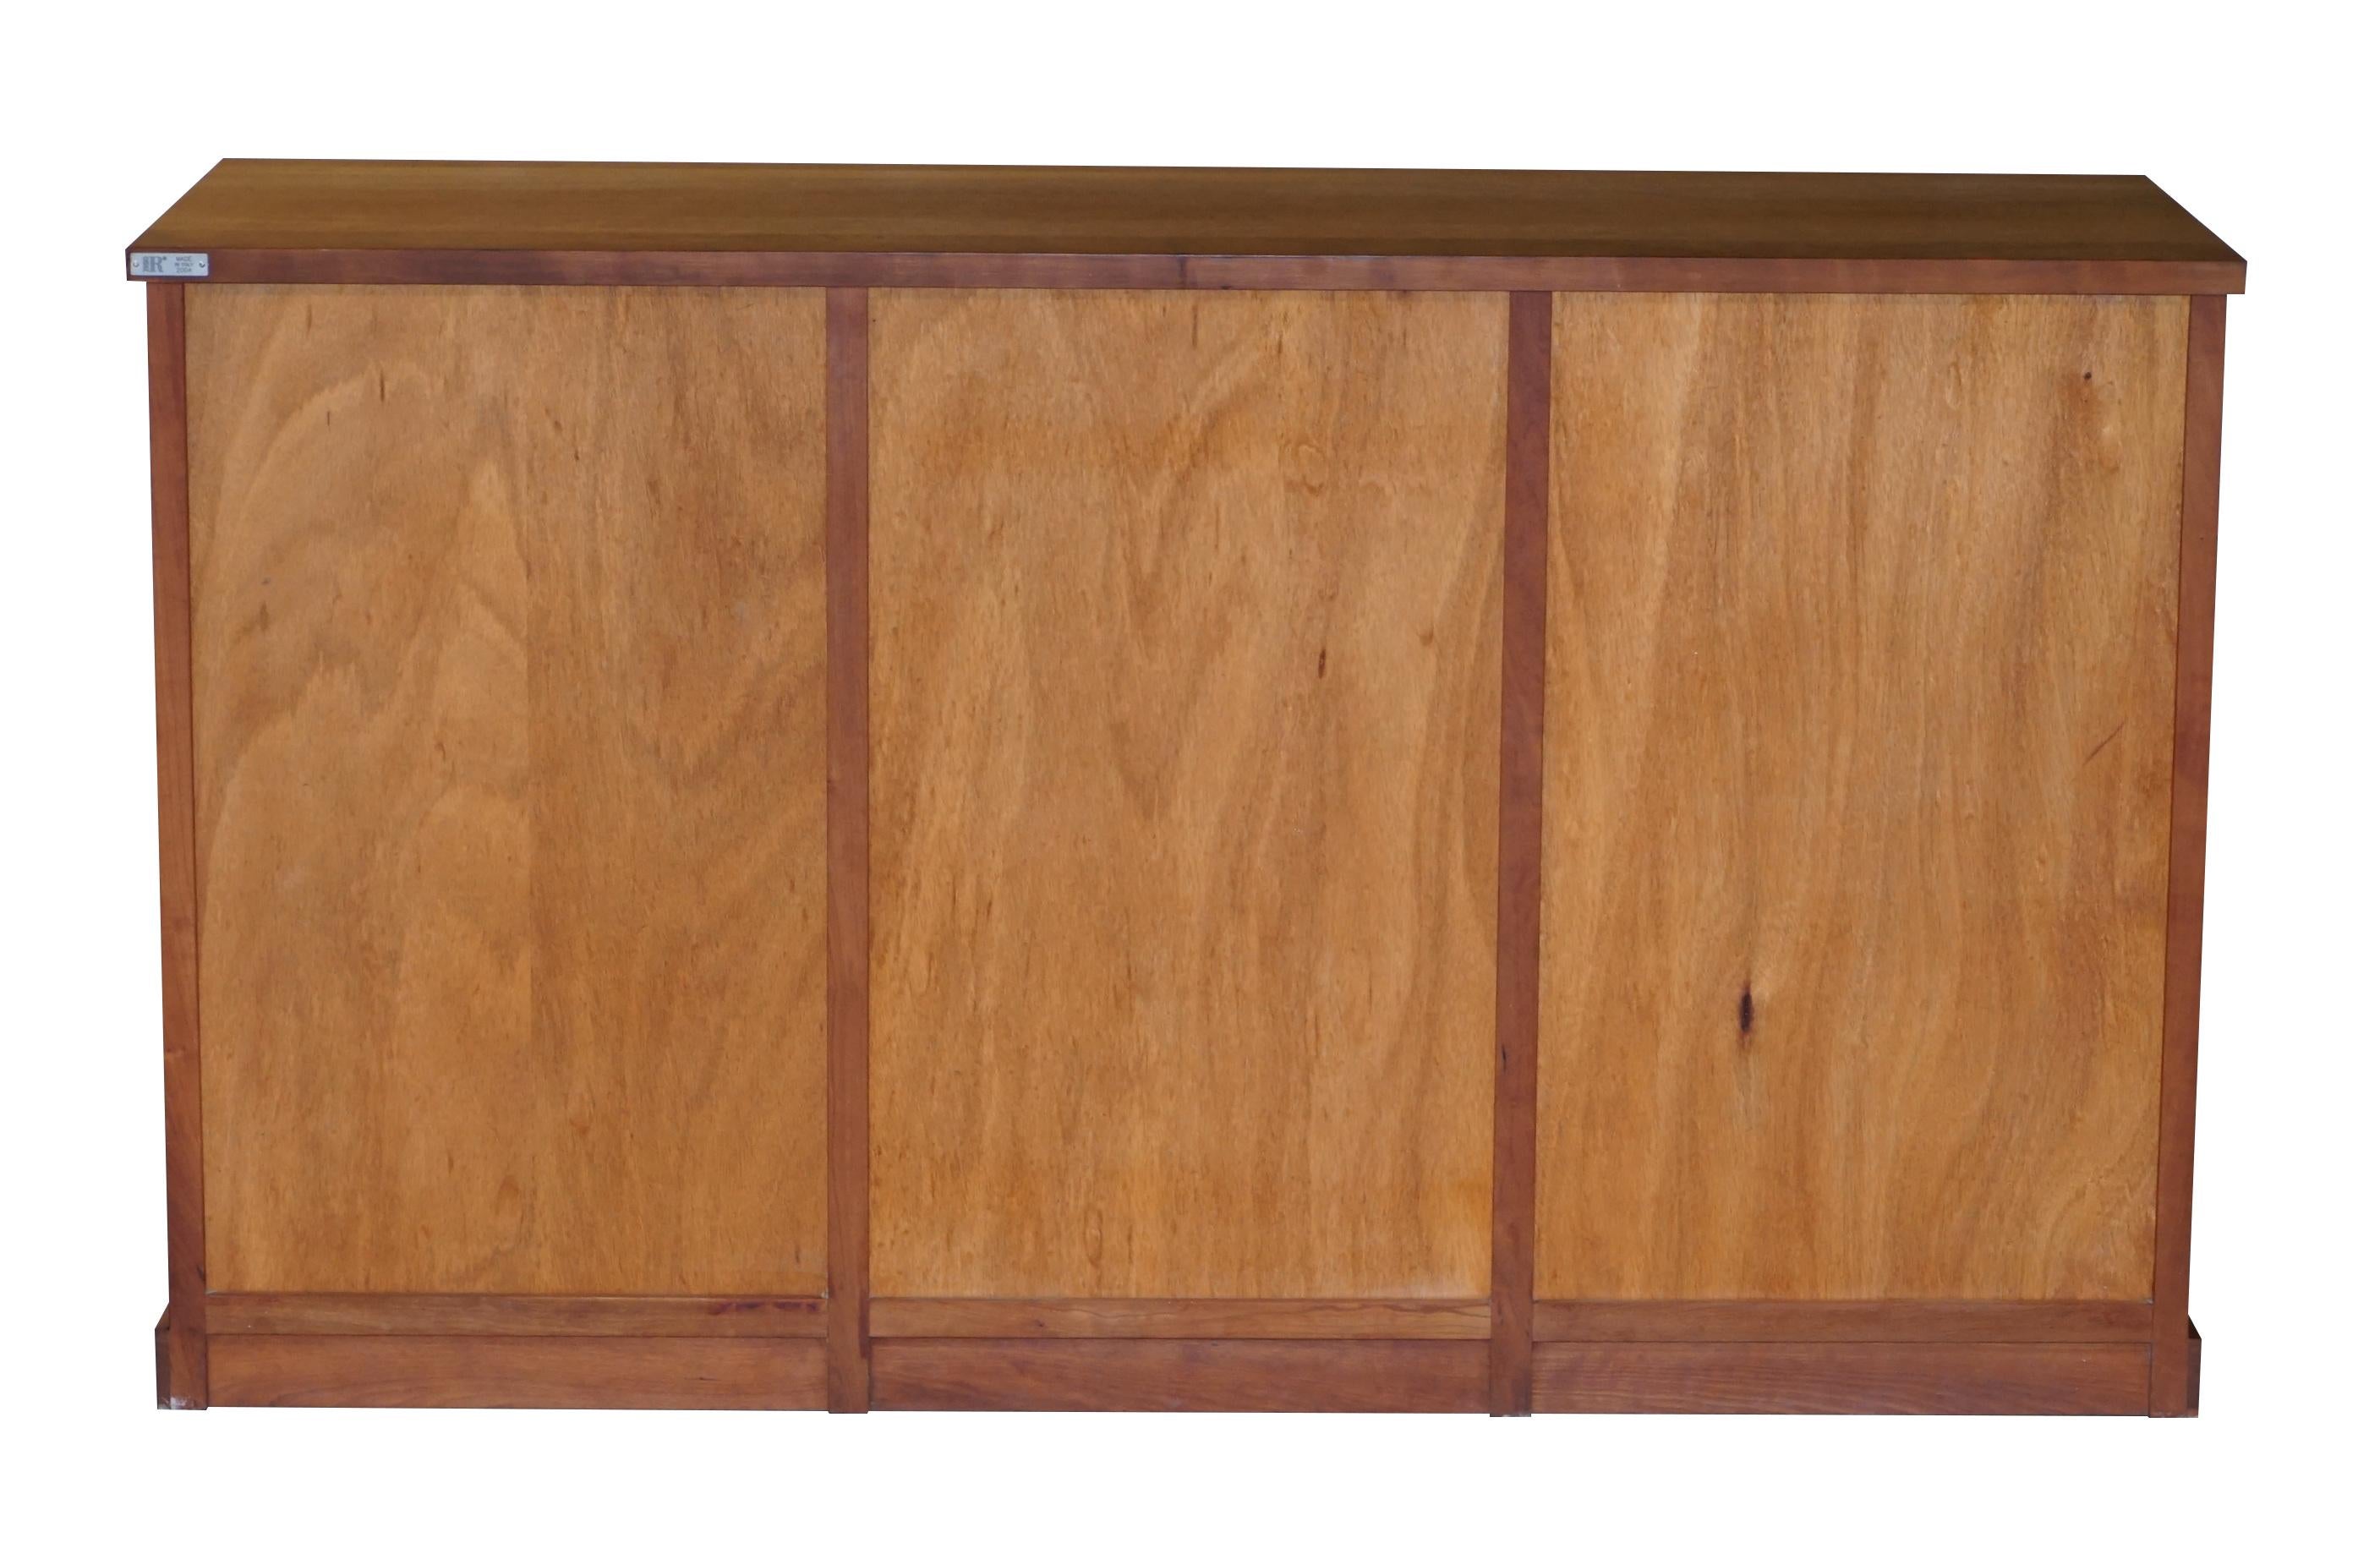 SOLID AMERICAN BLACK CHERRY WOOD MADE IN ITALY RIVA 1920 SIDEBOARD WITH DRAWERs 4